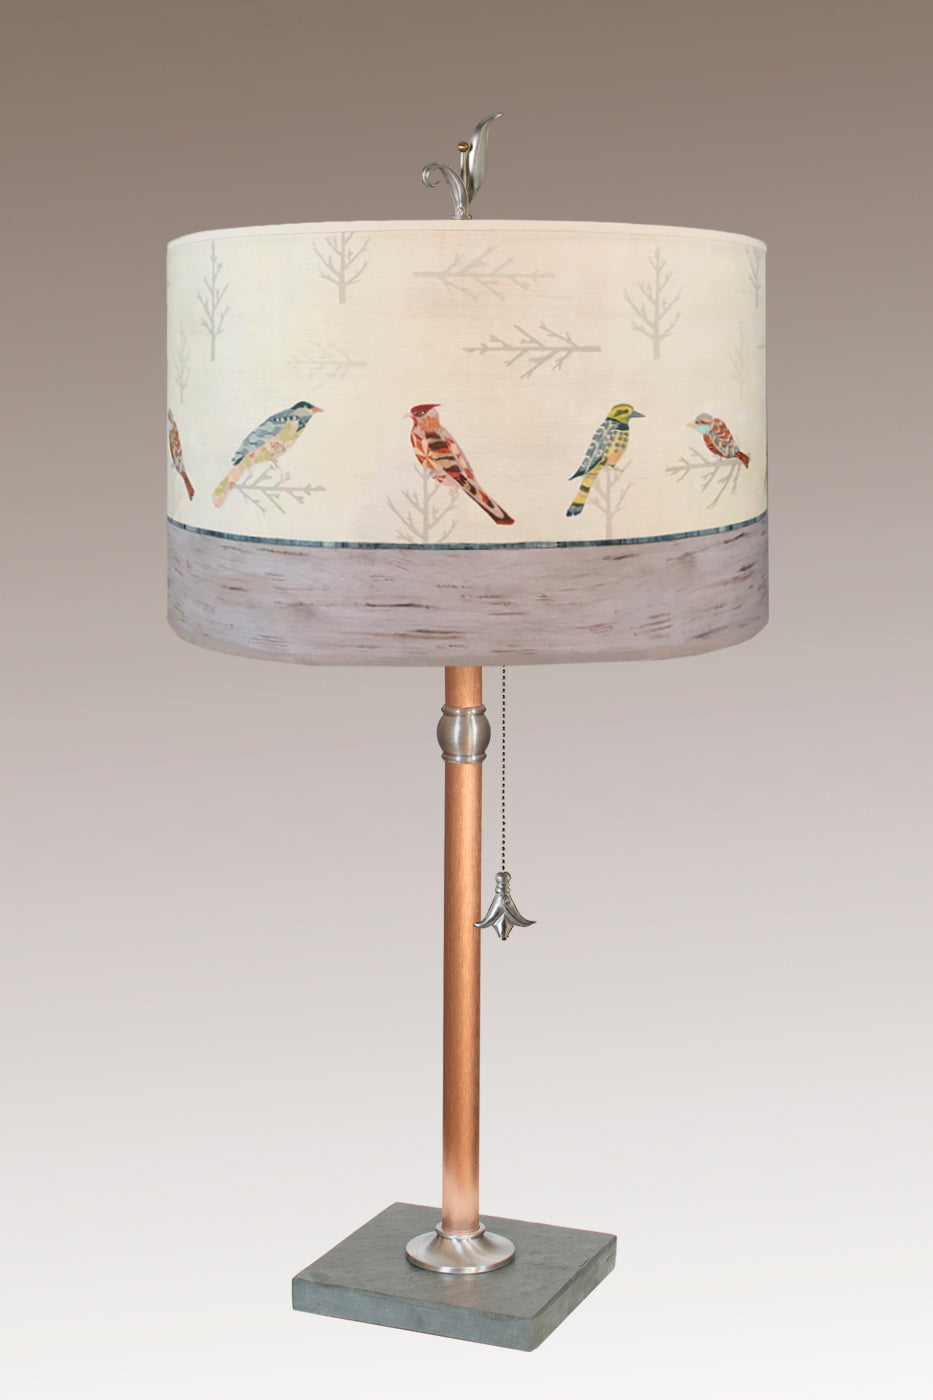 Janna Ugone & Co Table Lamps Copper Table Lamp with Large Drum Shade in Bird Friends